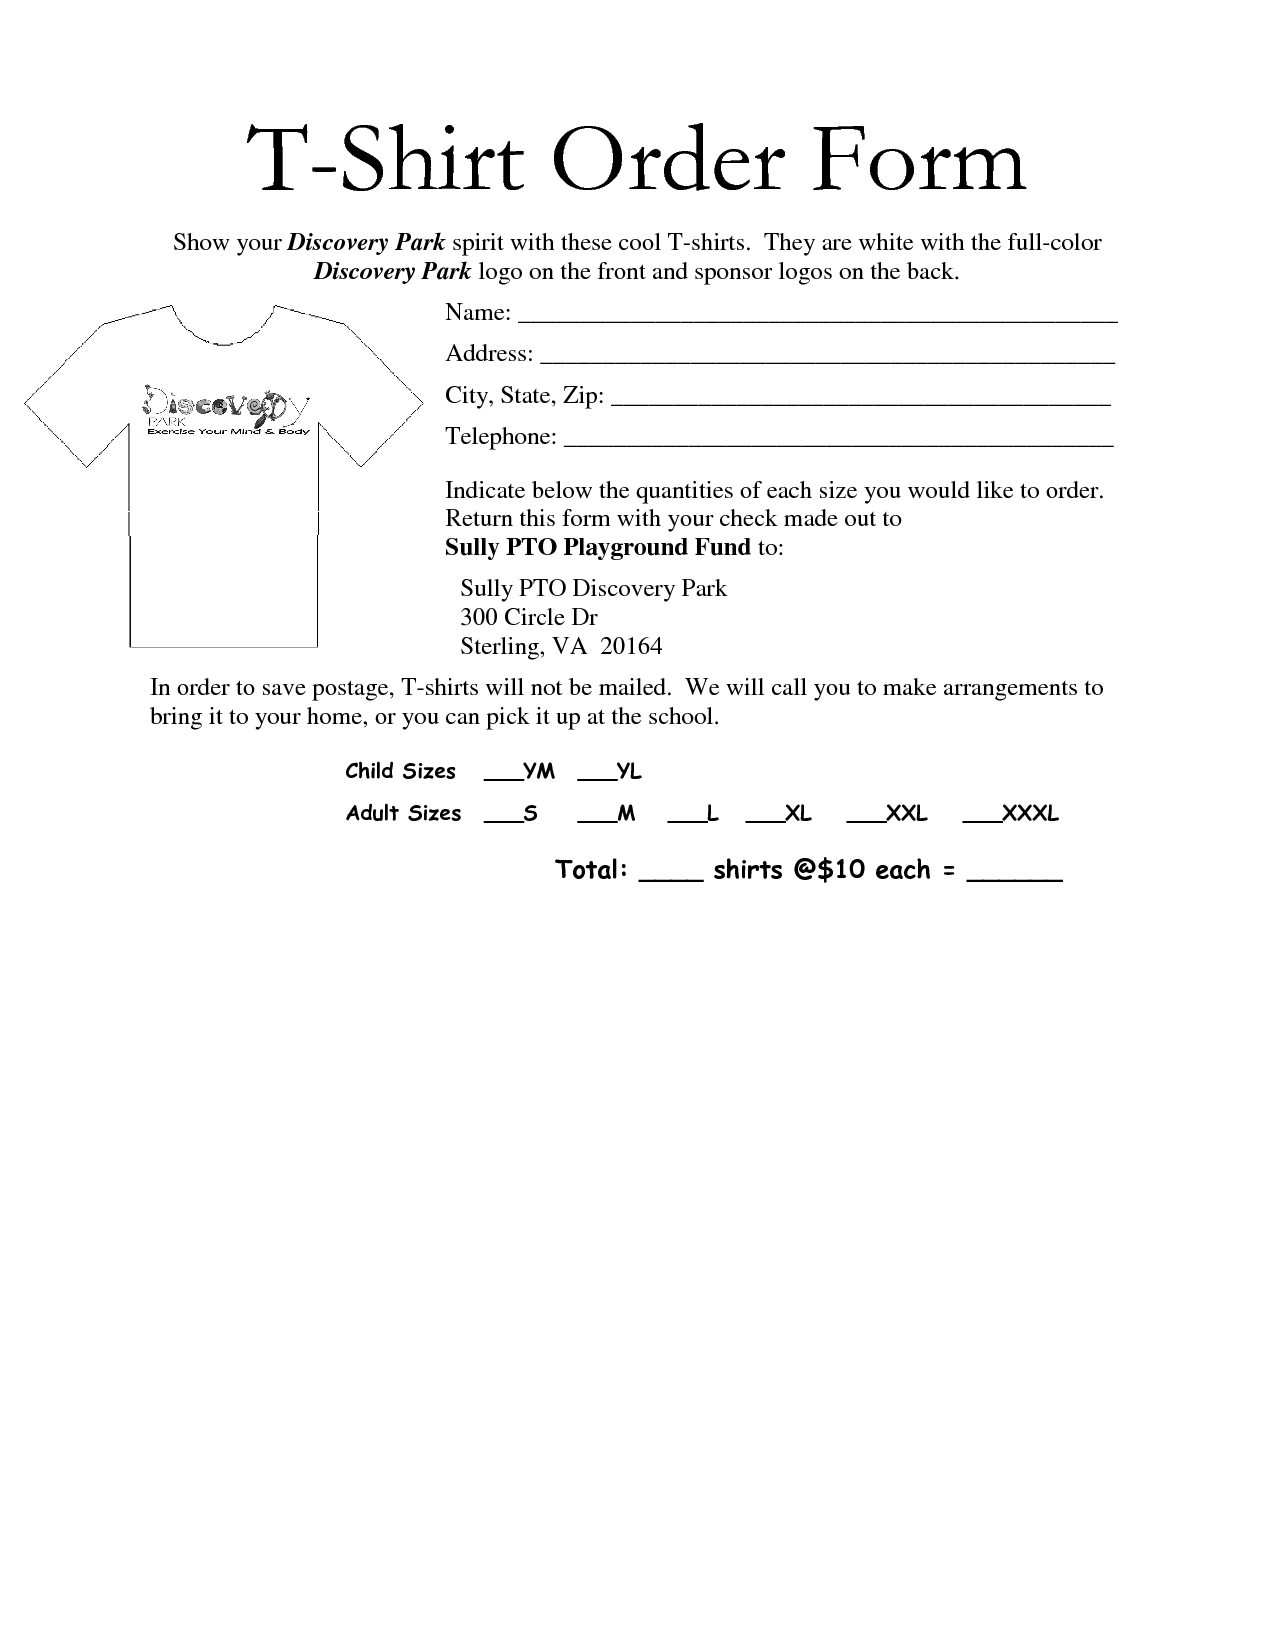 35 Awesome T Shirt Order Form Template Free Images Throughout Blank T Shirt Order Form Template